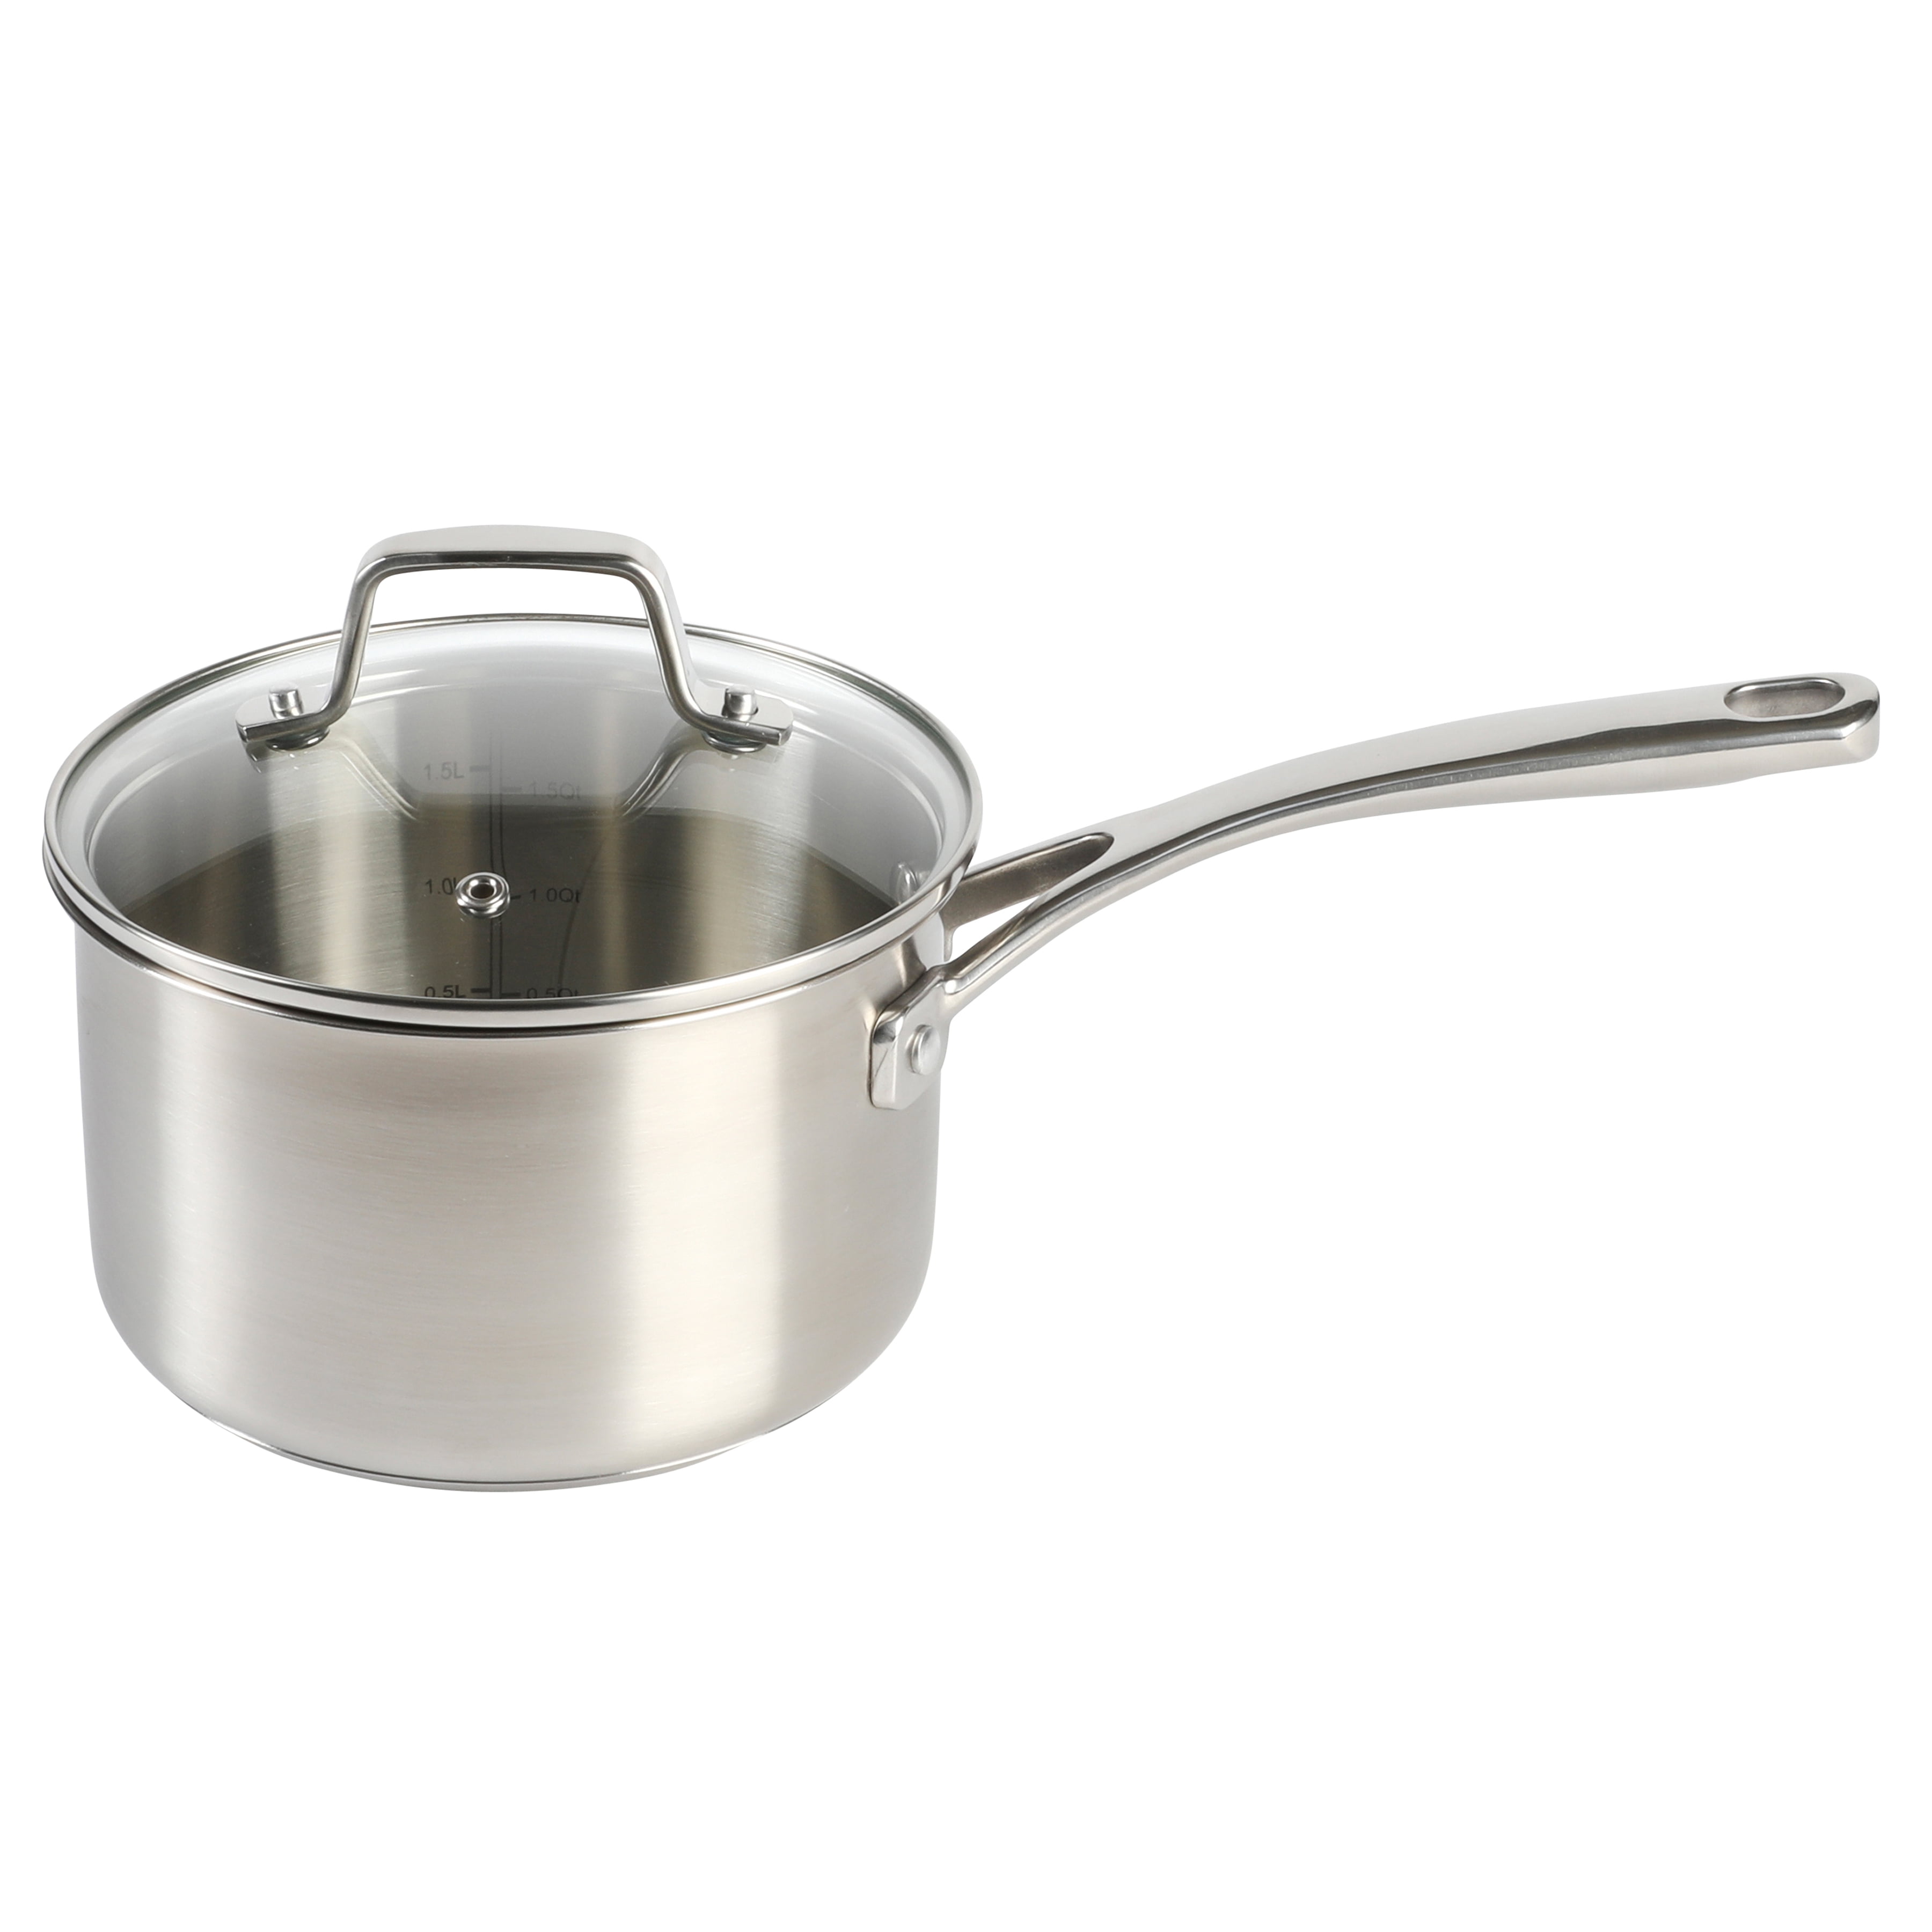 Ciwete 2 Quart Sauce Pan with Lid, Tri Ply Stainless Steel Saucepan 2 qt with Stainless Steel Lid, 2 Measuring Lines, Upgraded Packaging, Cool